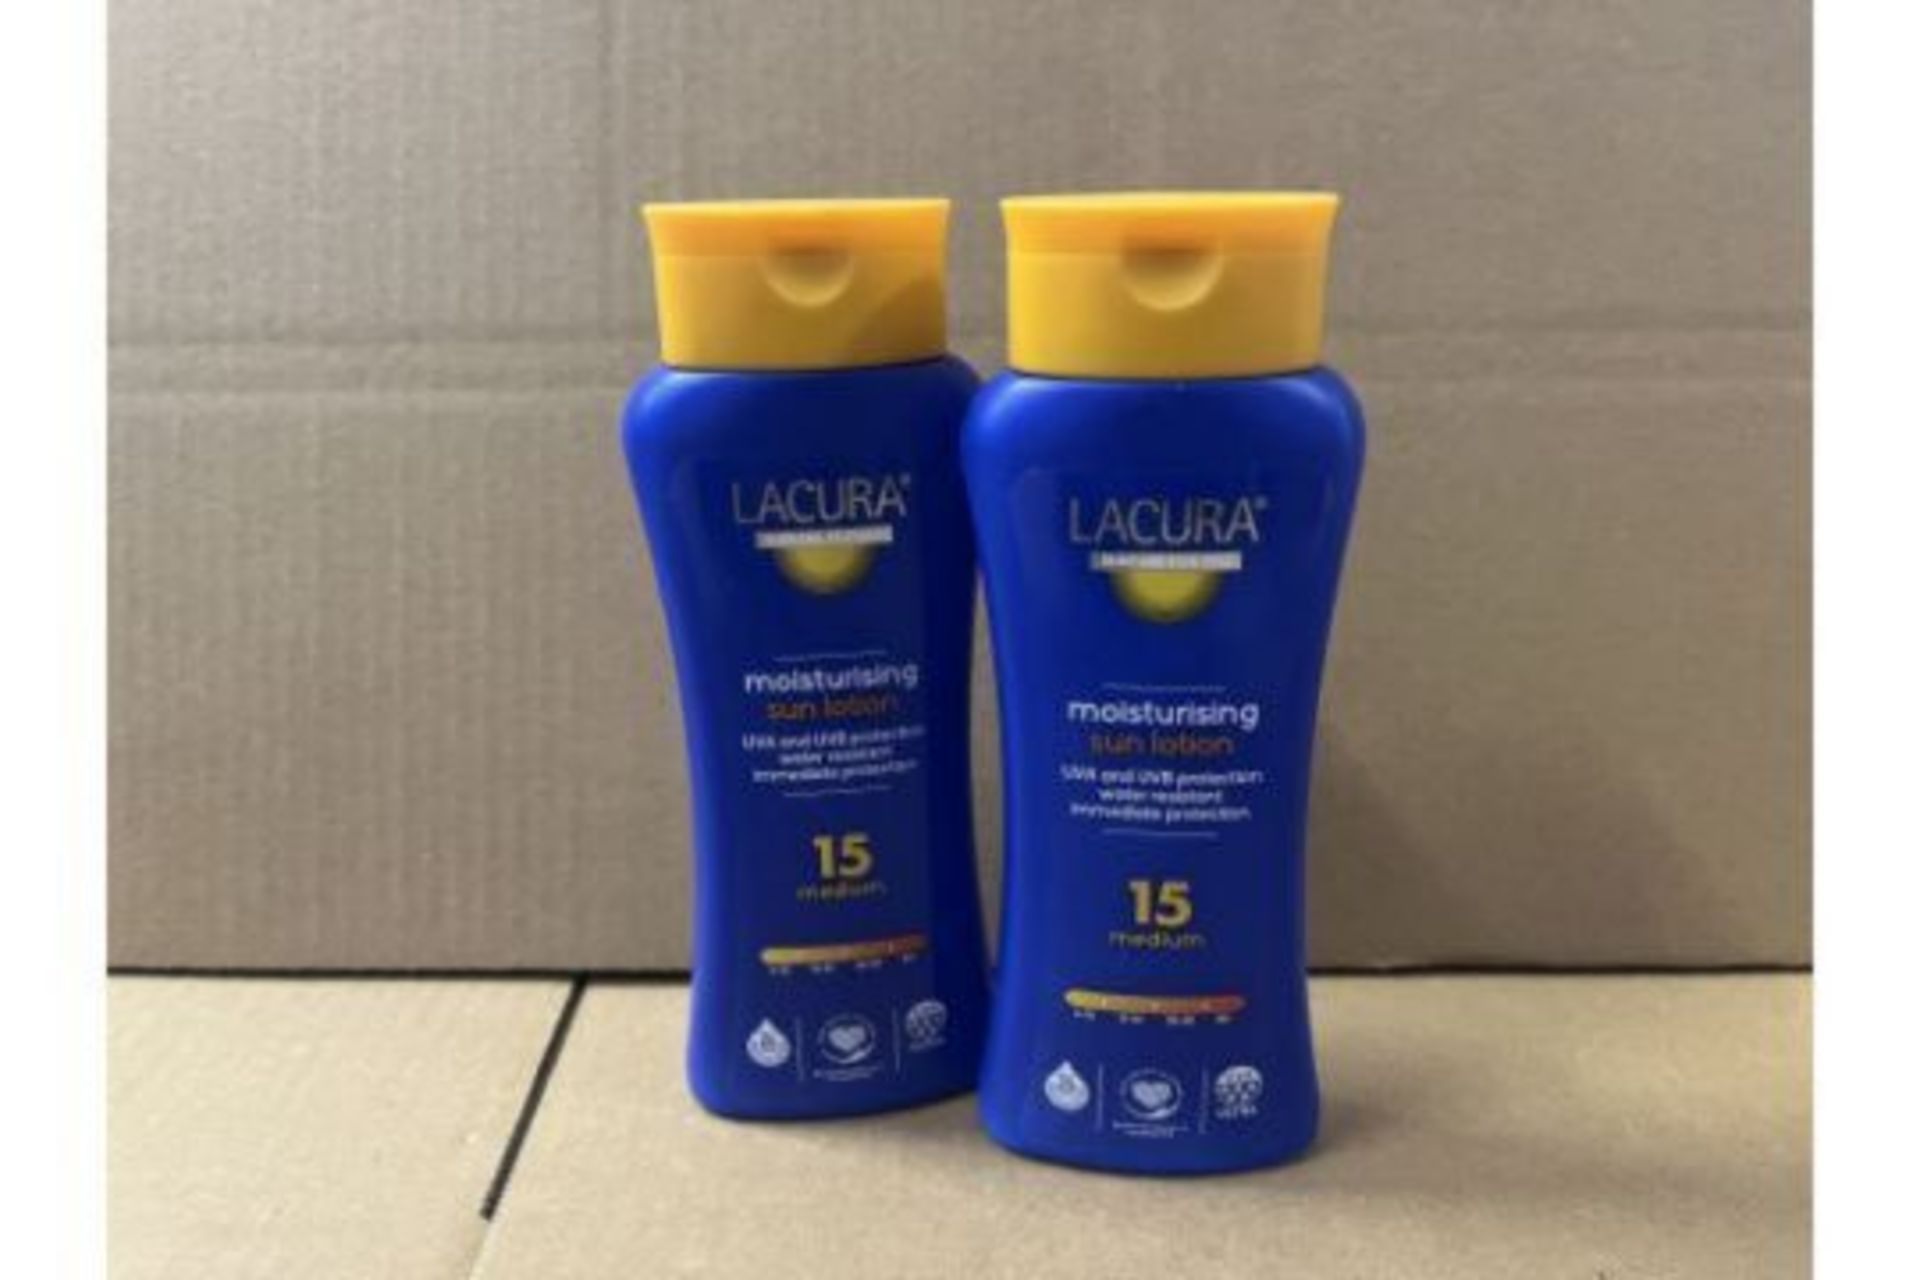 60 X LACURA MOISTURISING SUN LOTION. UVA & UVB PROTECTION. WATER RESISTANT. IMMEDIATE PROTECTION. 15